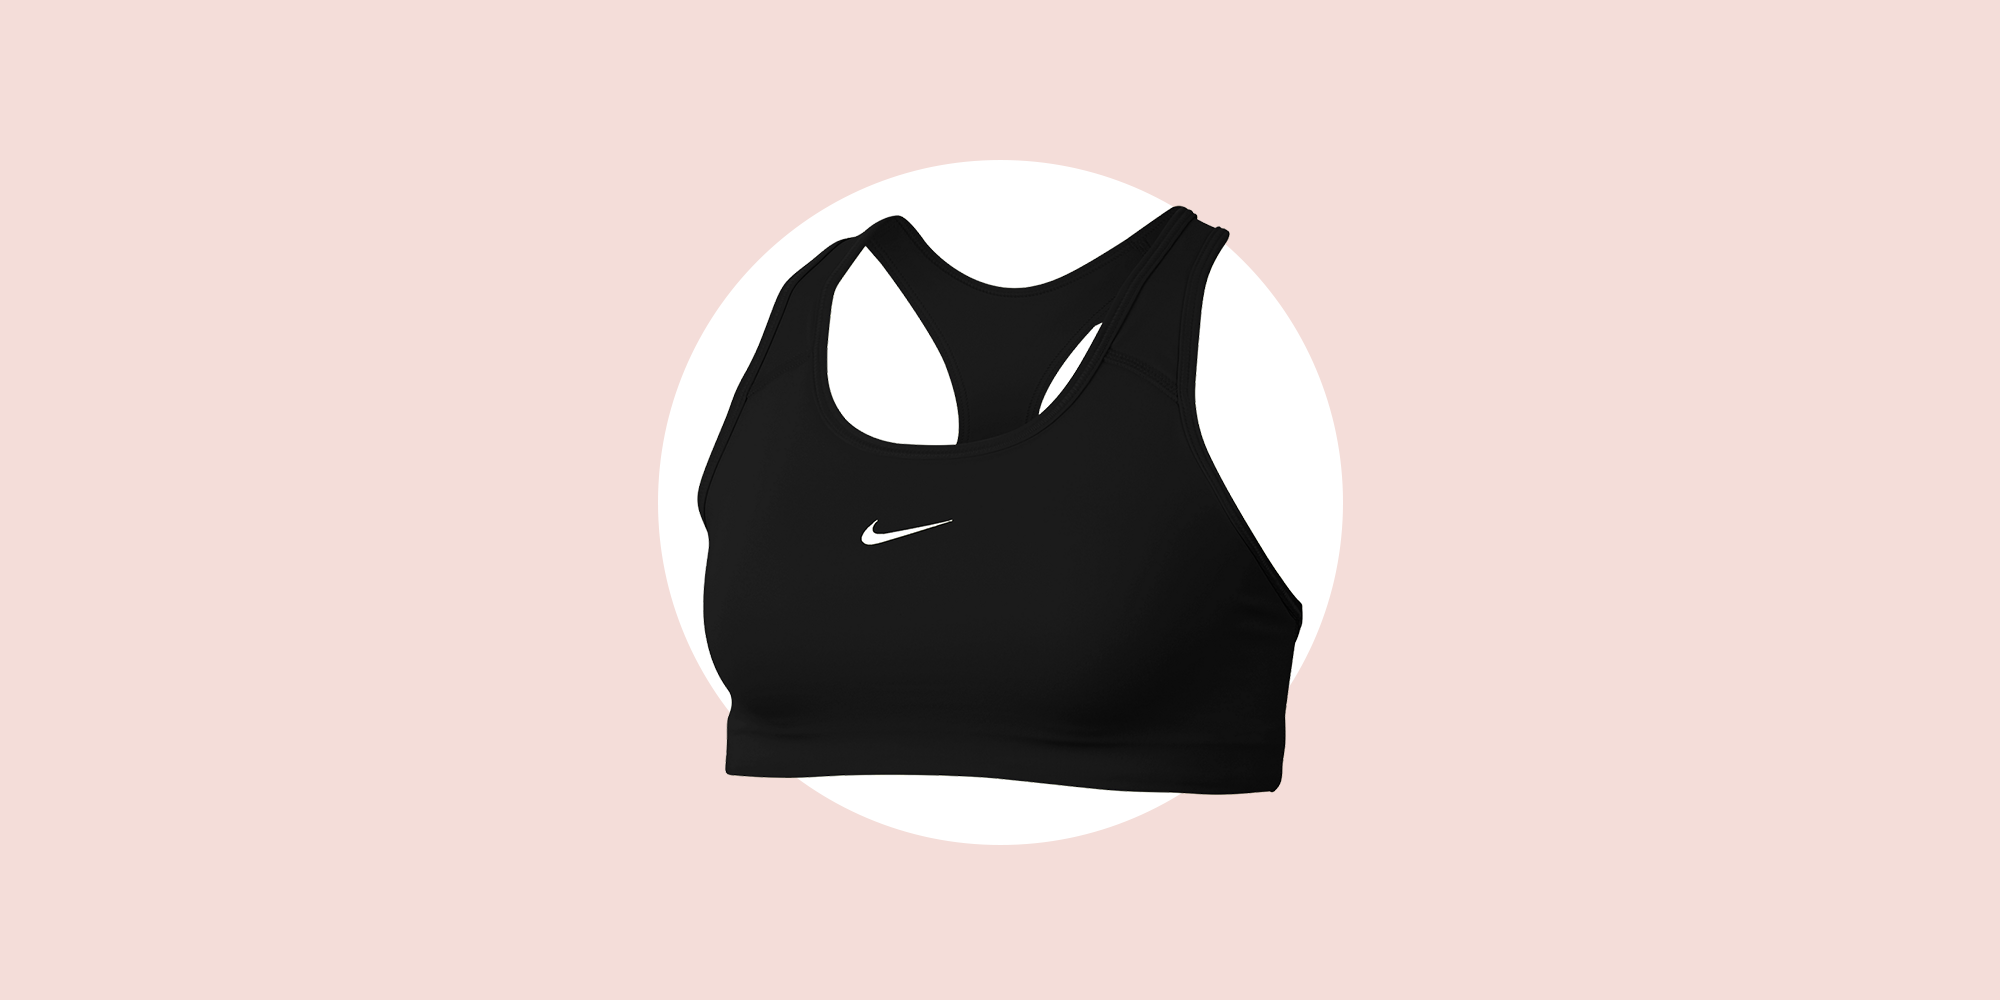 Stay comfortable and supported in the Nike Victory Define Sports Bra